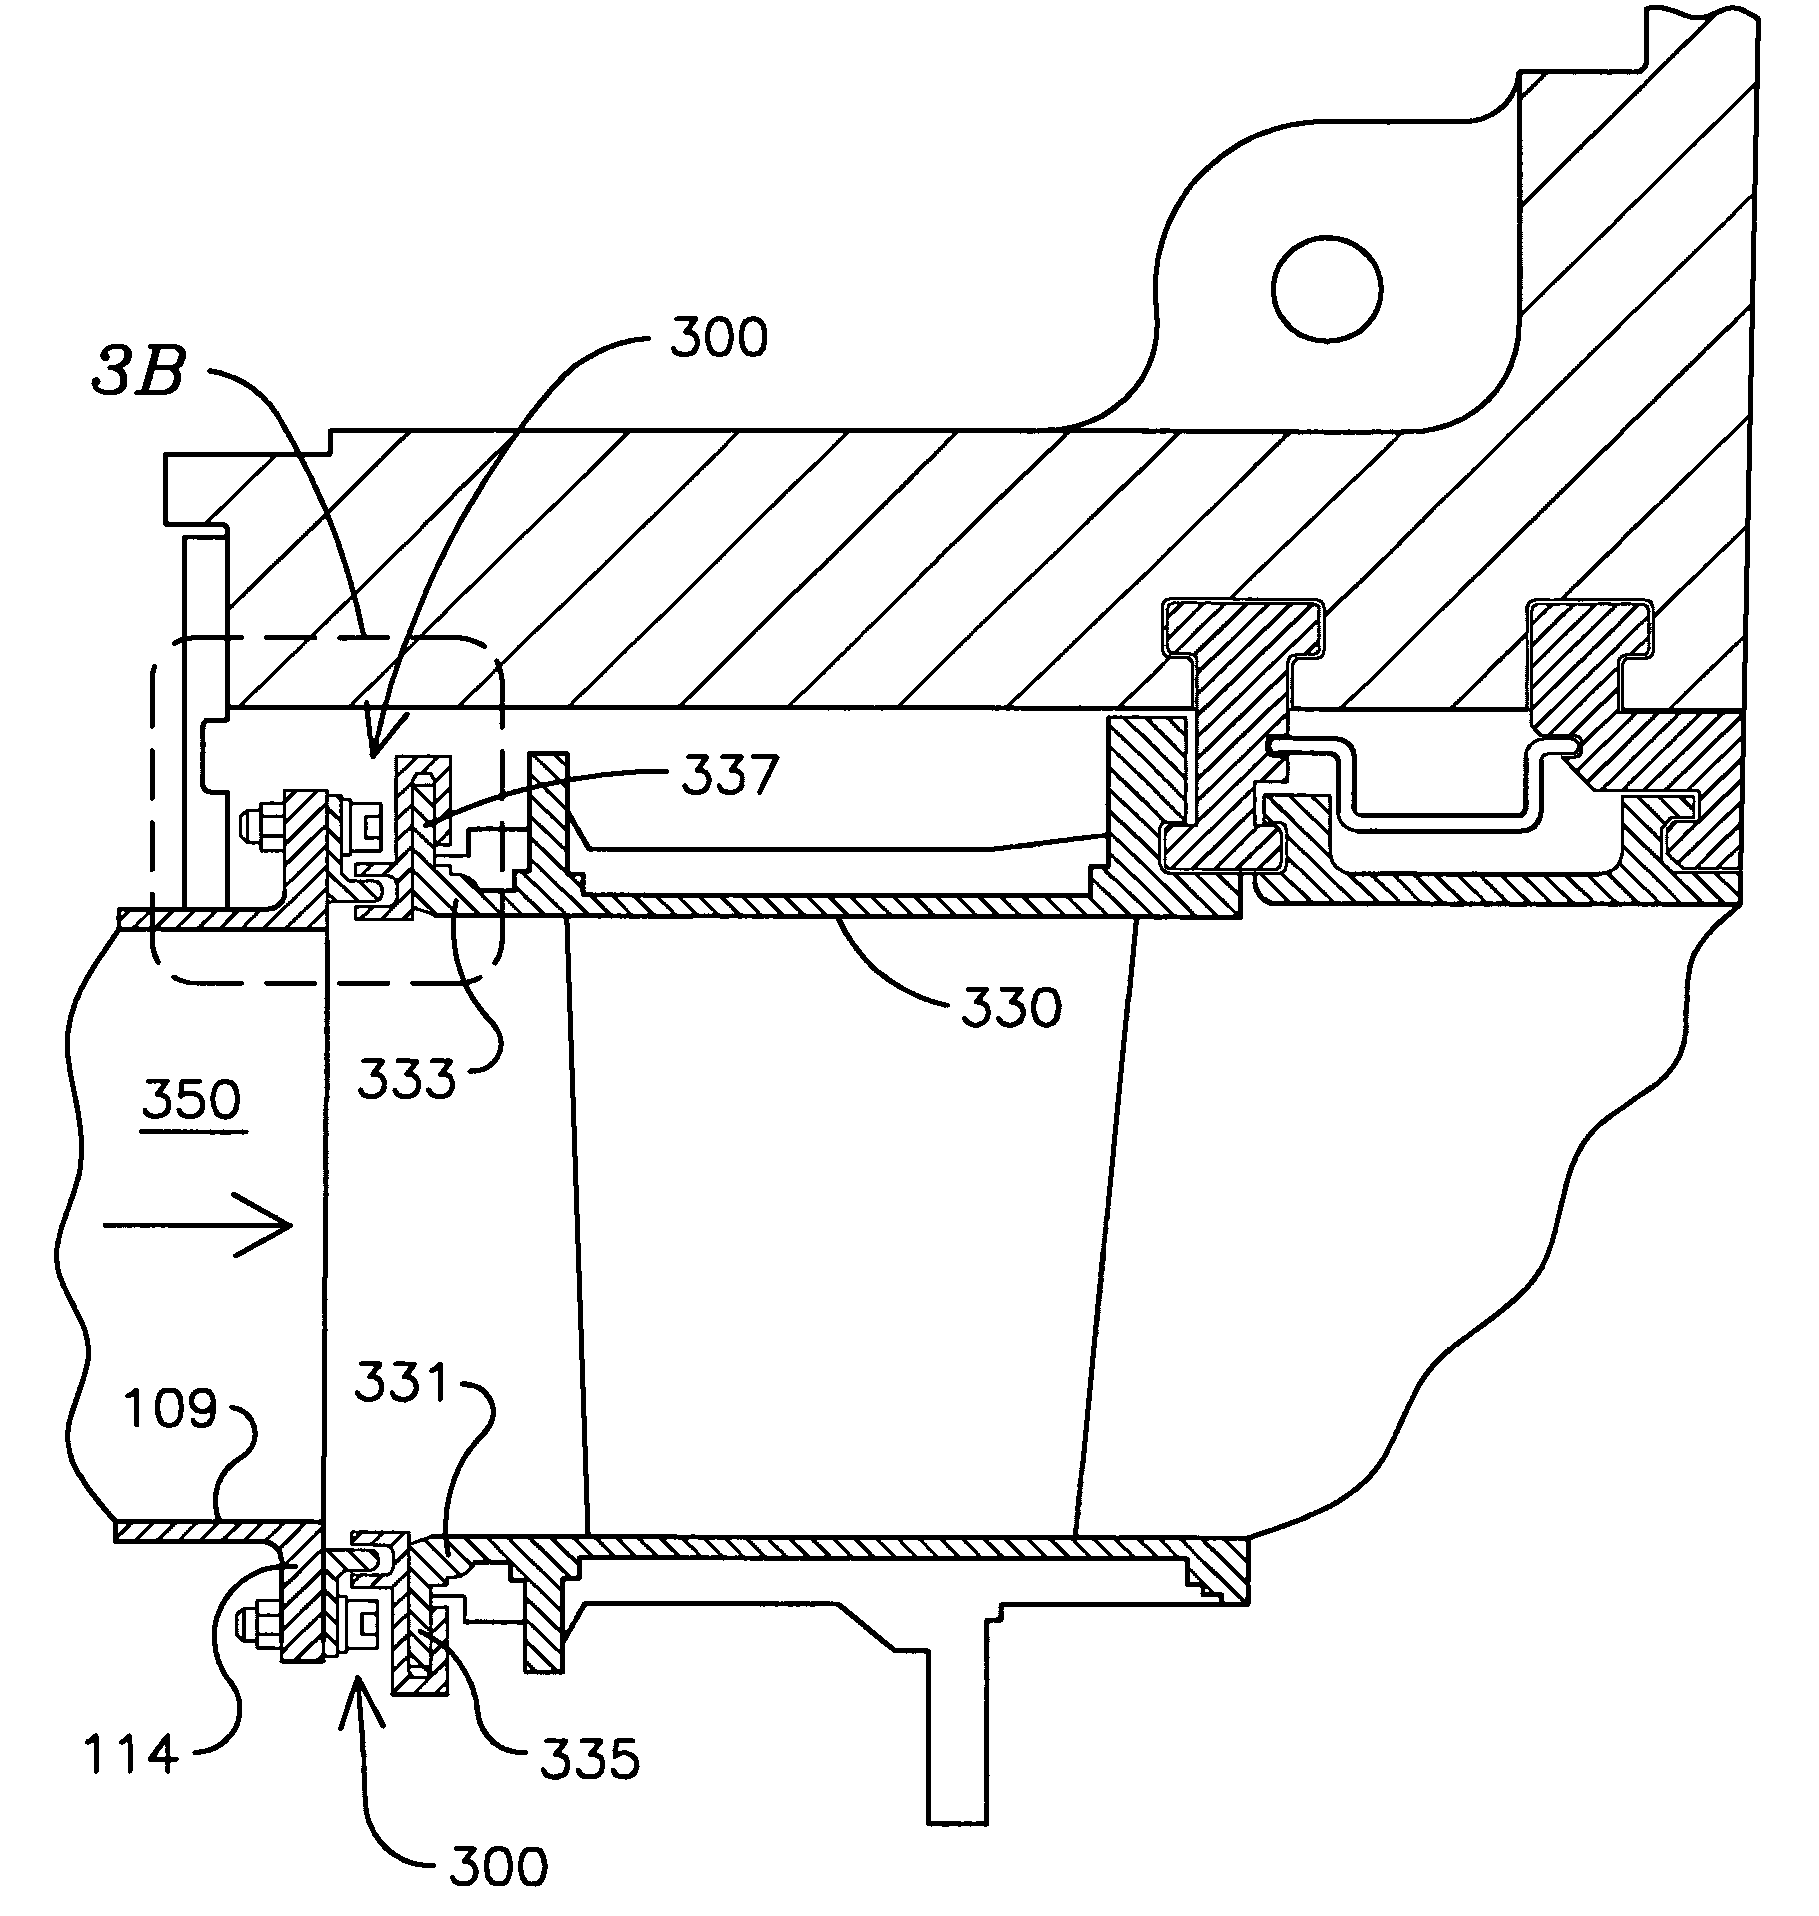 Transition-to-turbine seal apparatus and kit for transition/turbine junction of a gas turbine engine